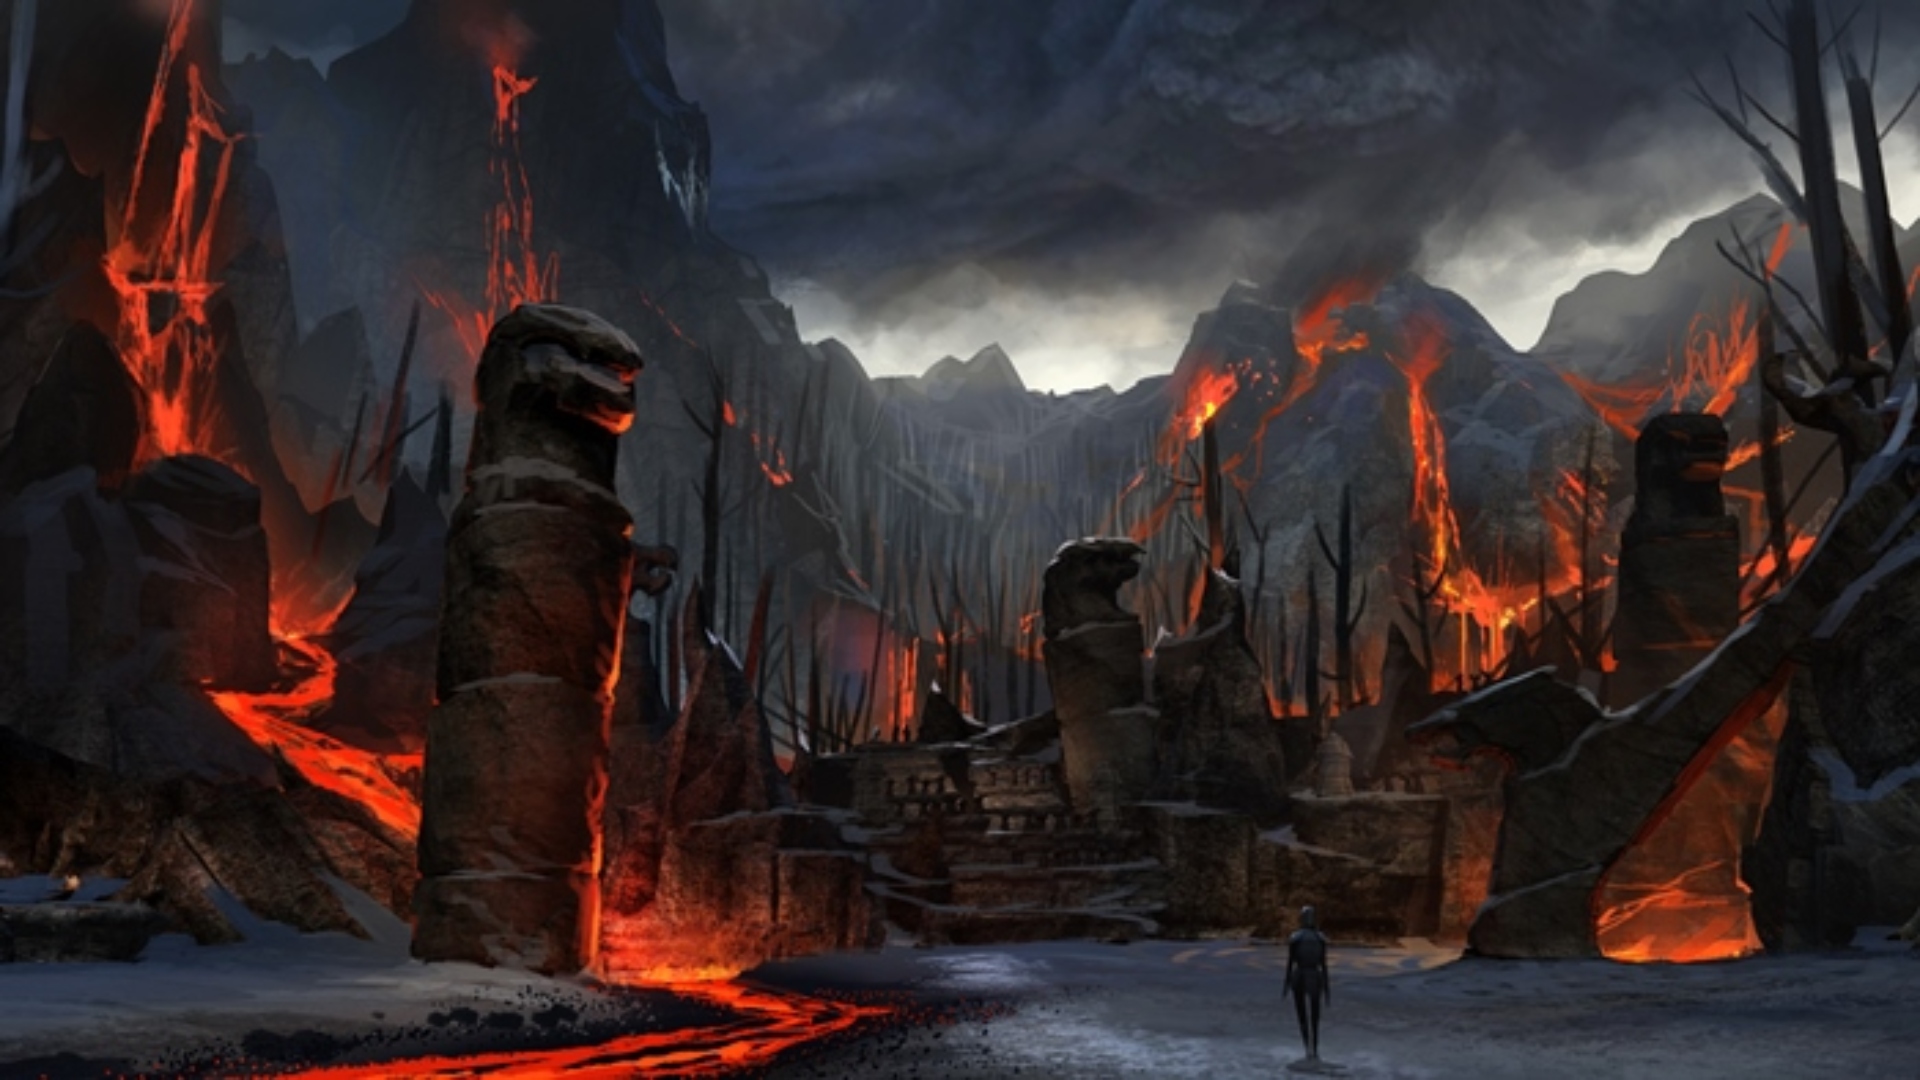 A fiery arena from ESO.